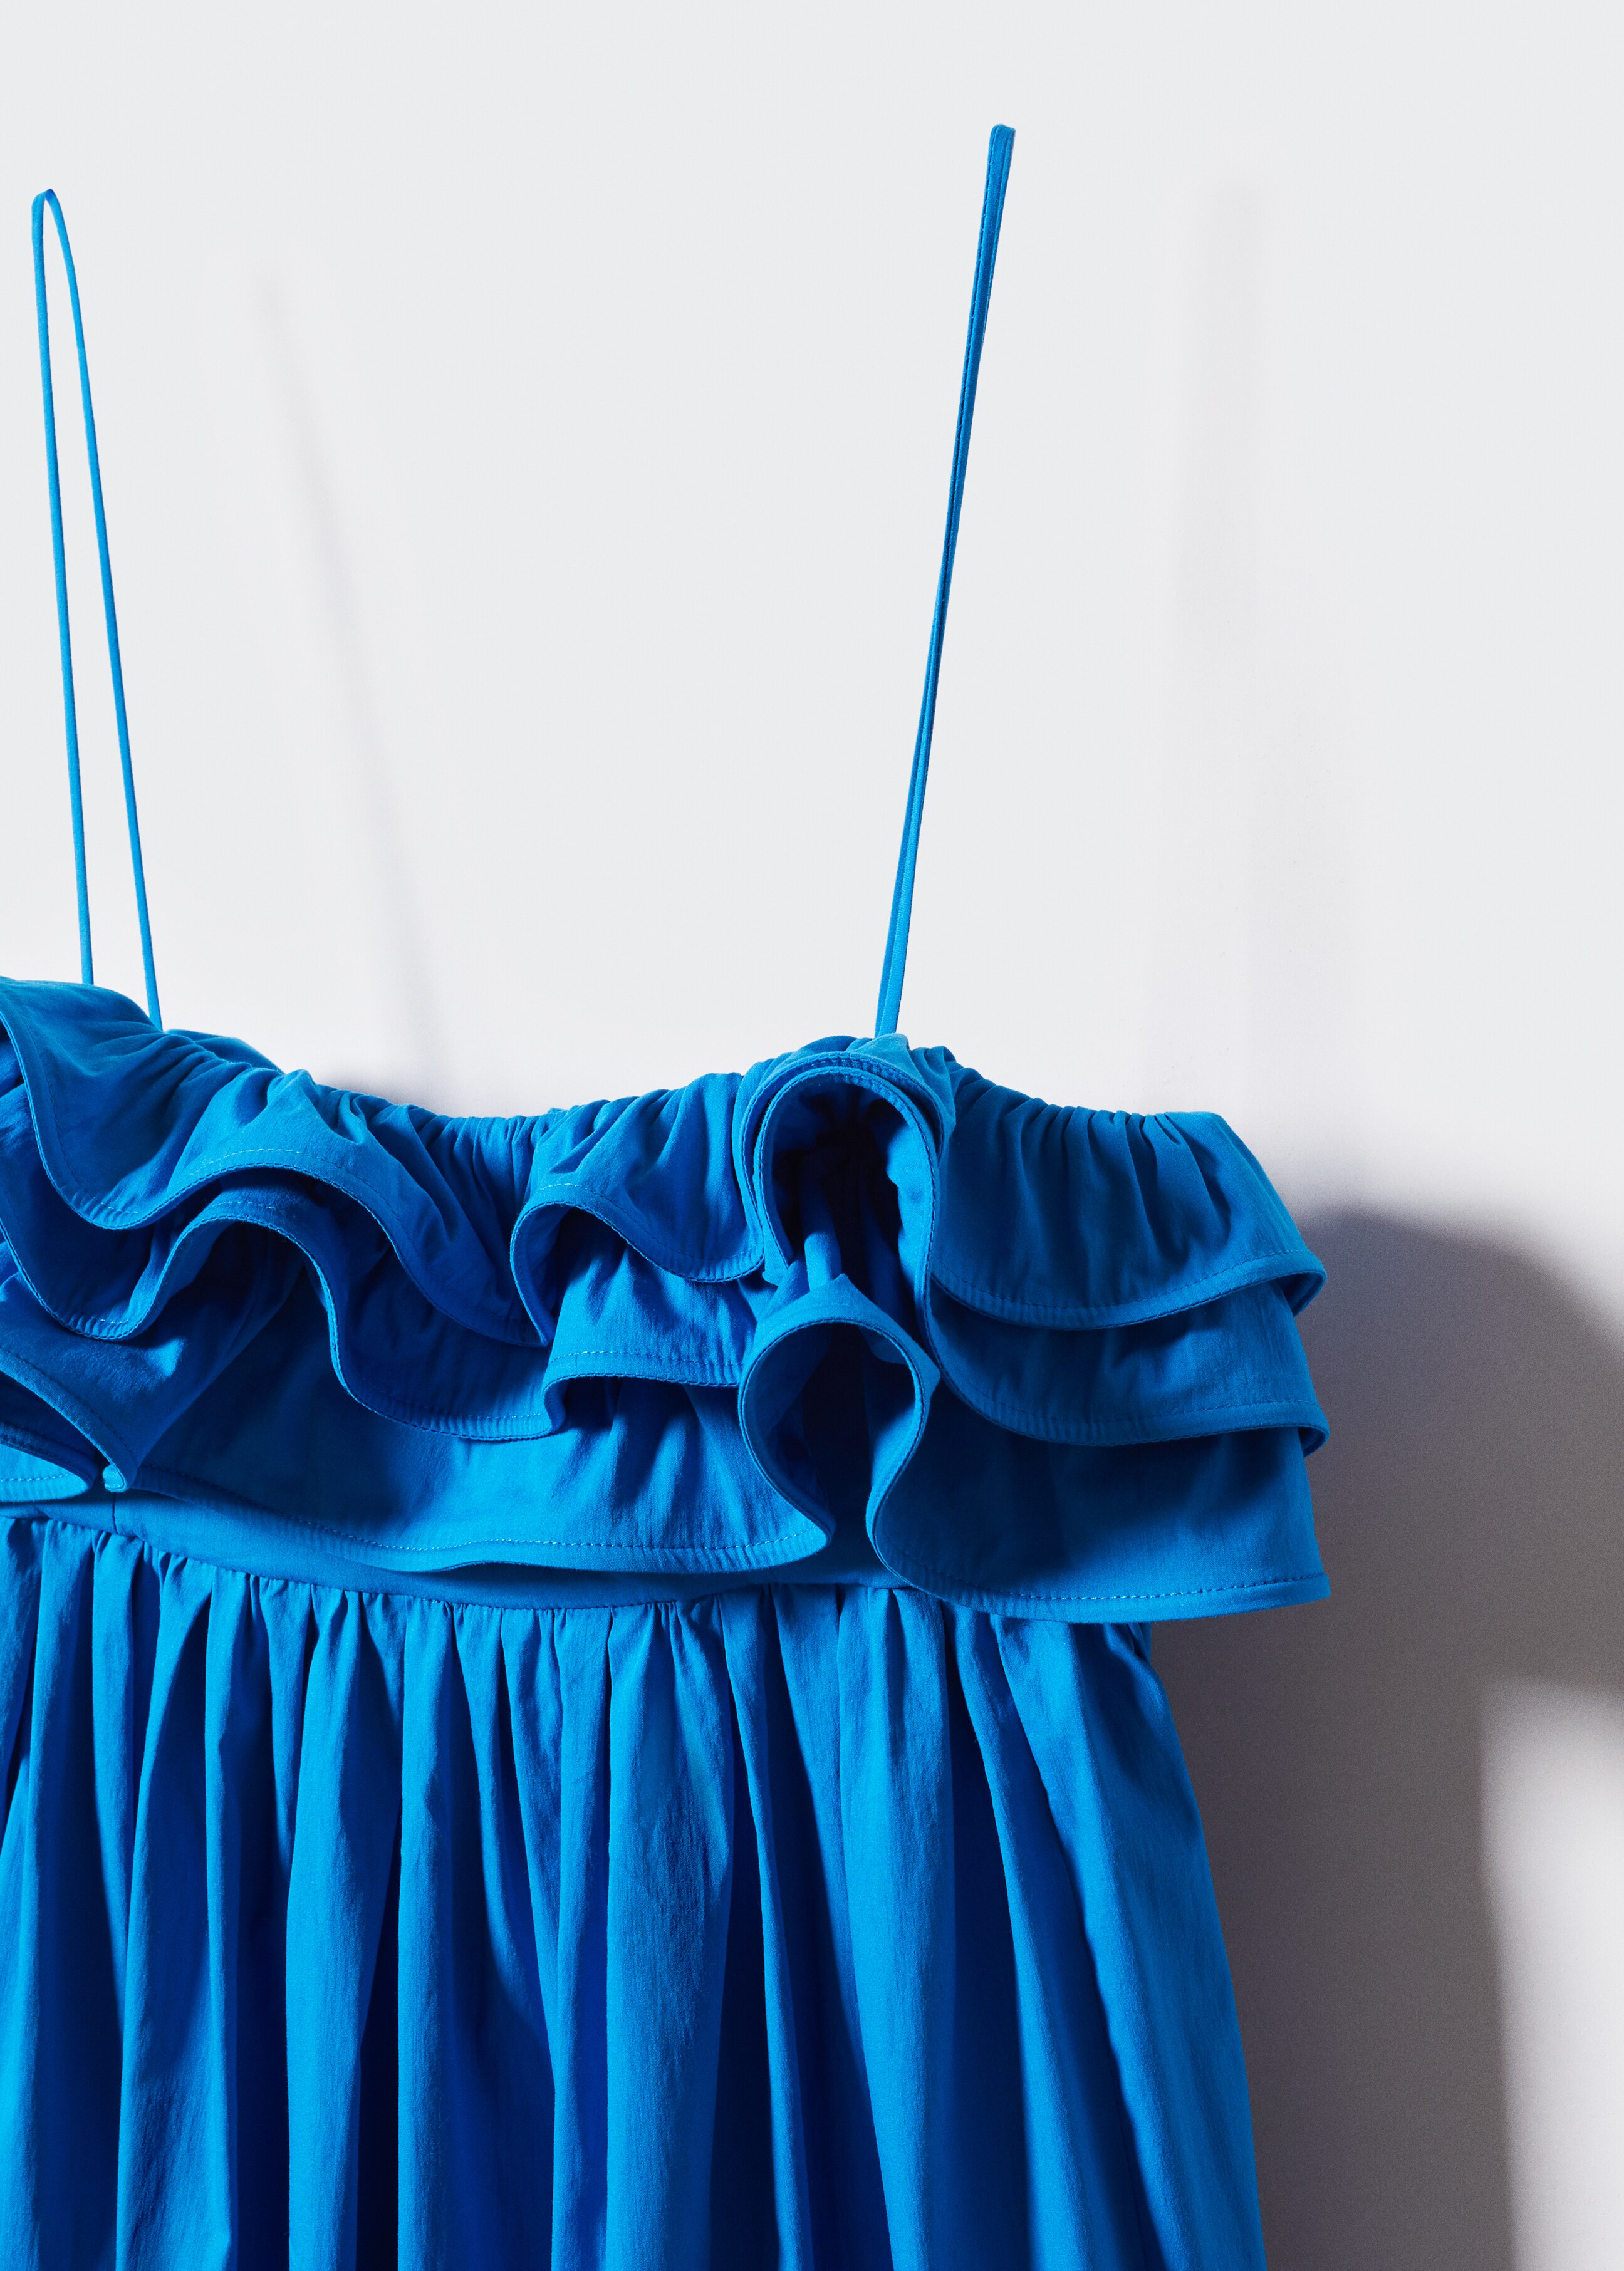 Ruffle gown - Details of the article 8